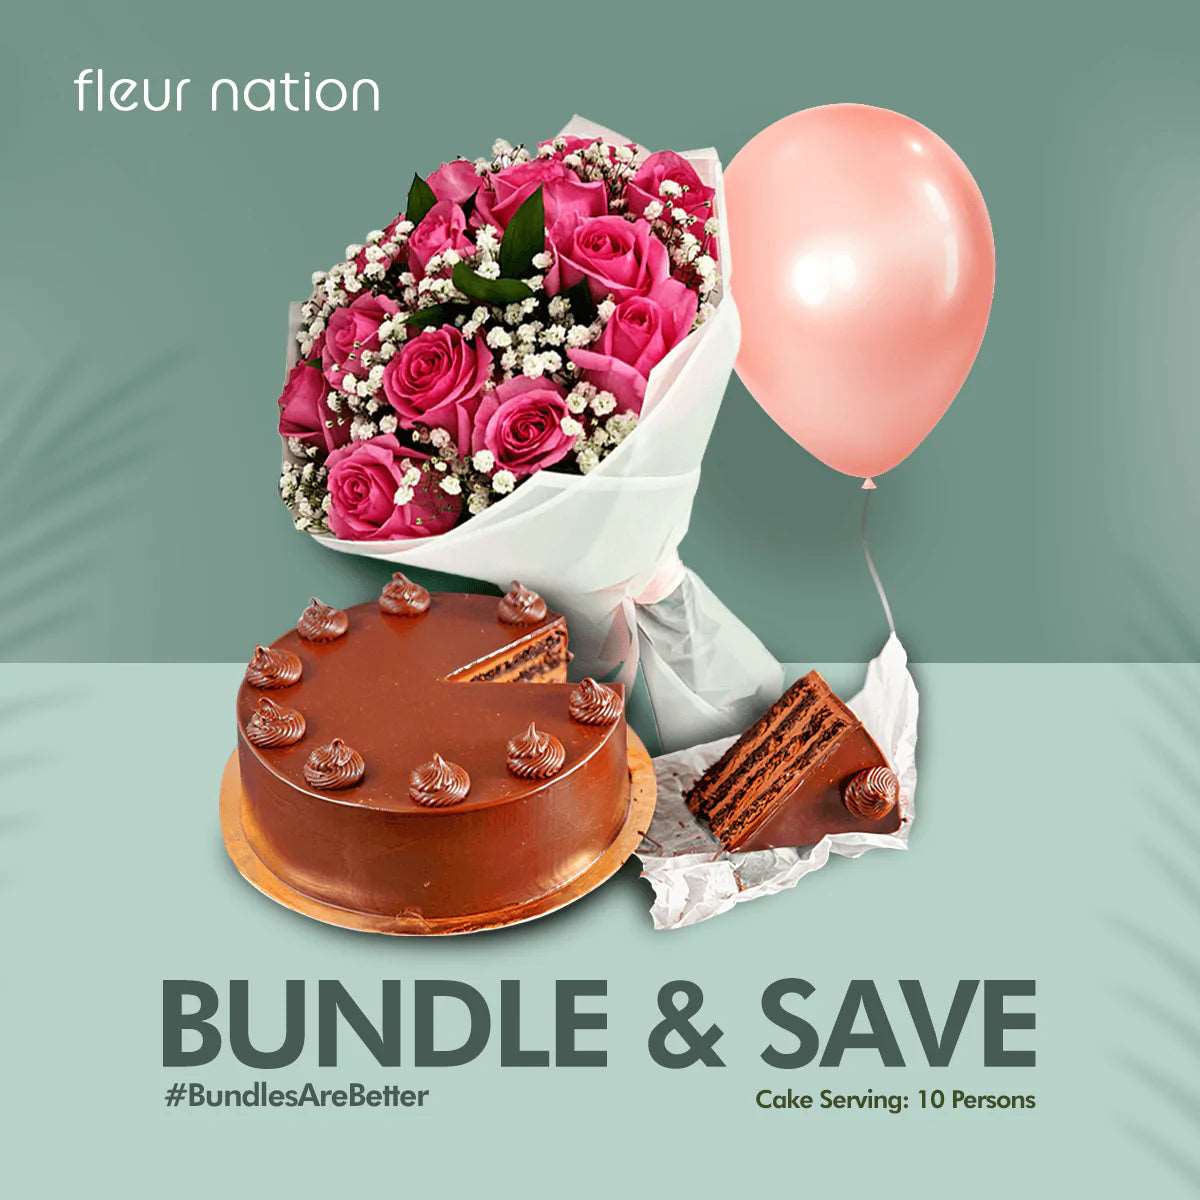 My Surprise - flowers, cake and balloon - Fleur Nation - flowers, chocolates, cakes and gifts same day delivery in Dubai